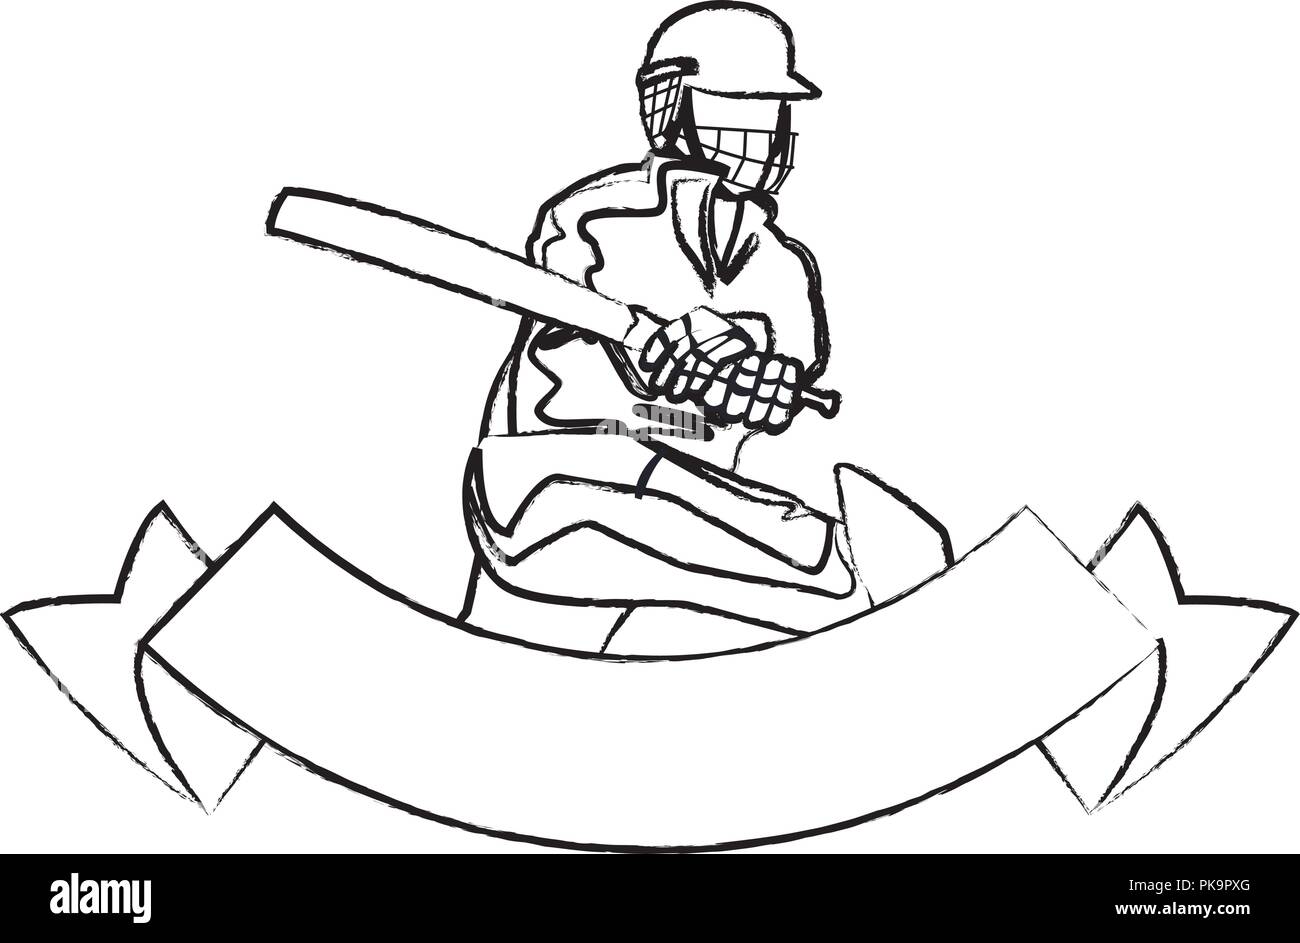 Cricket player with bat sketch Stock Vector